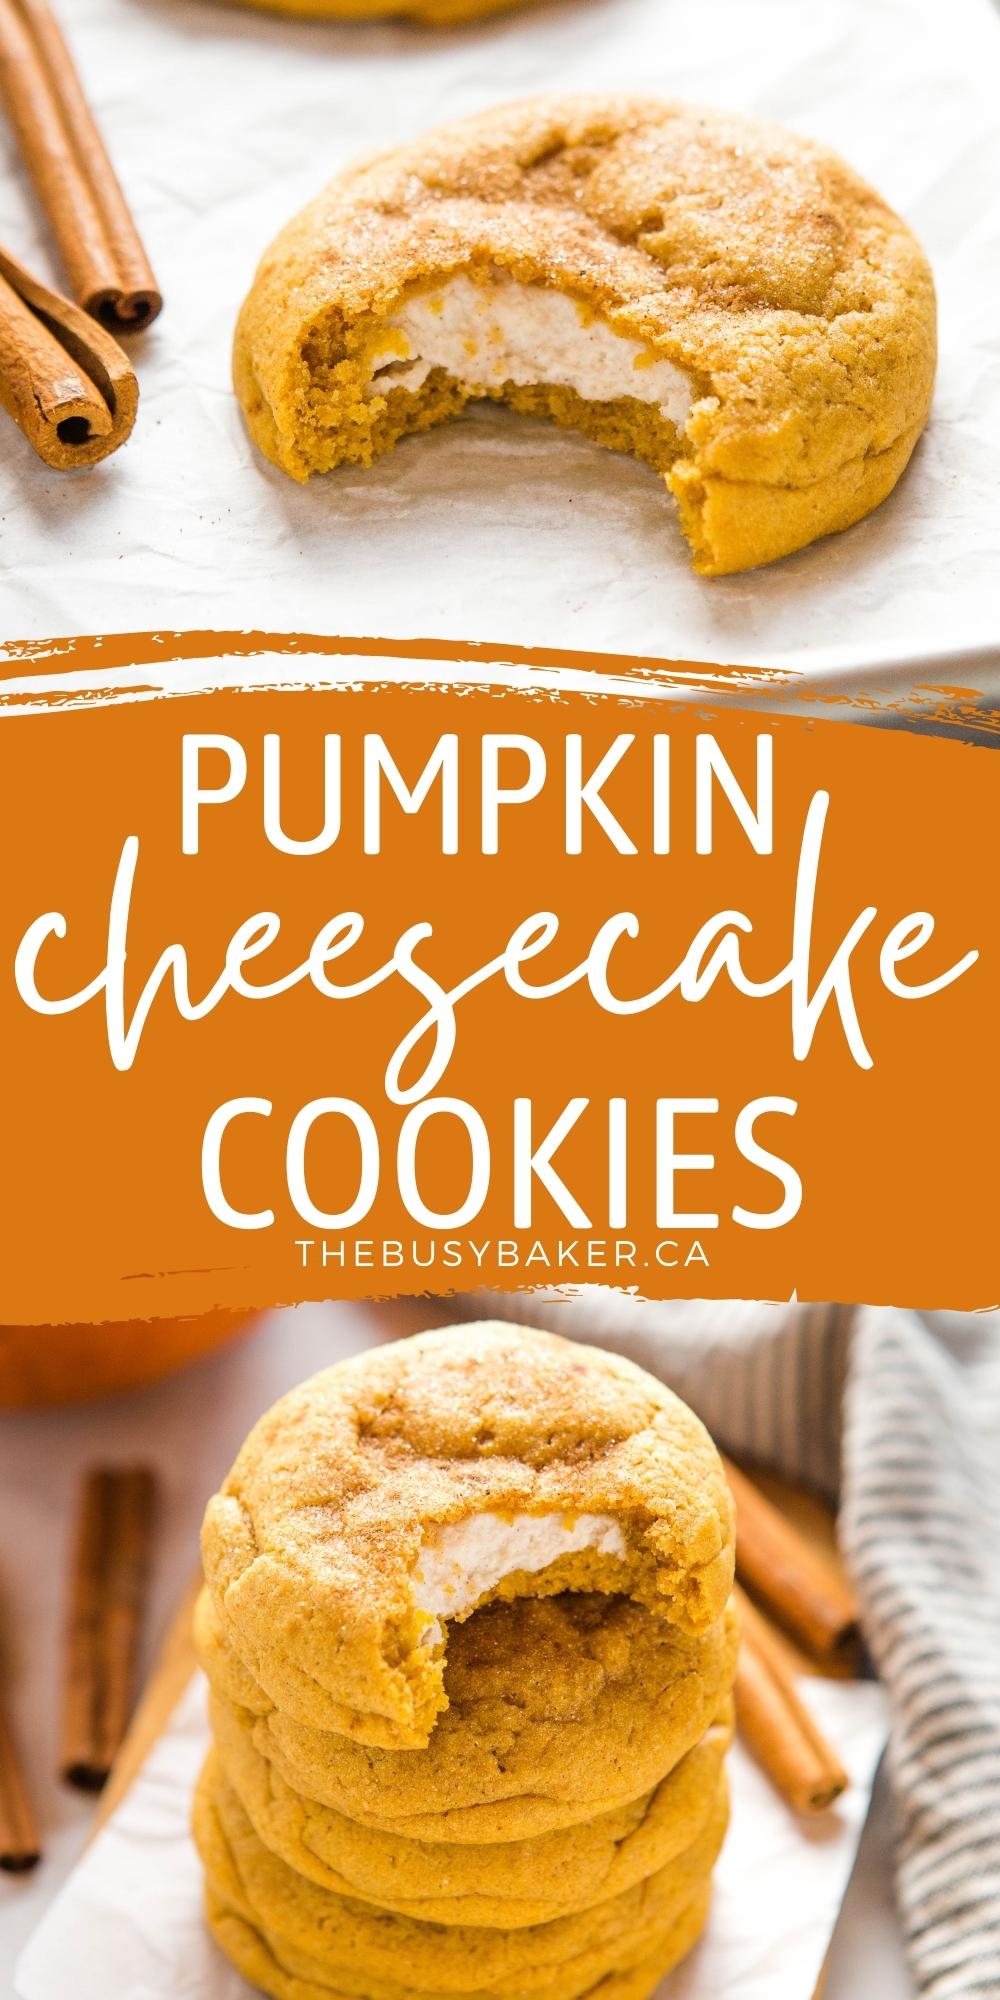 These Pumpkin Cheesecake Cookies are deliciously soft and chewy, full of pumpkin and spice, and packed with a sweet cheesecake filling! Recipe from thebusybaker.ca! #pumpkincheesecakecookies #cheesecakecookies #falldessert #pumpkincookies via @busybakerblog